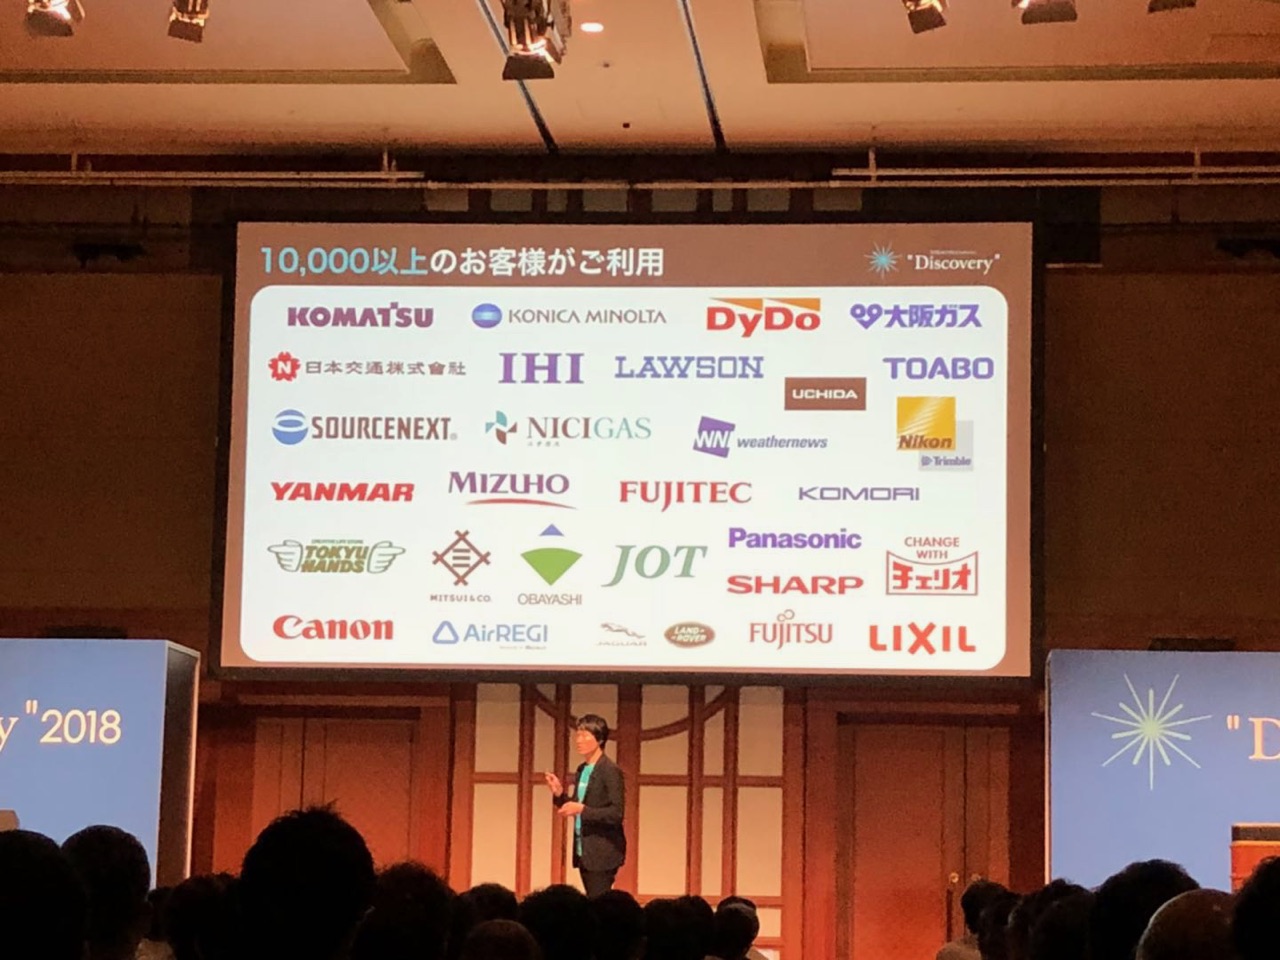 SORACOM Conference “Discovery”2018に参加いたしました。